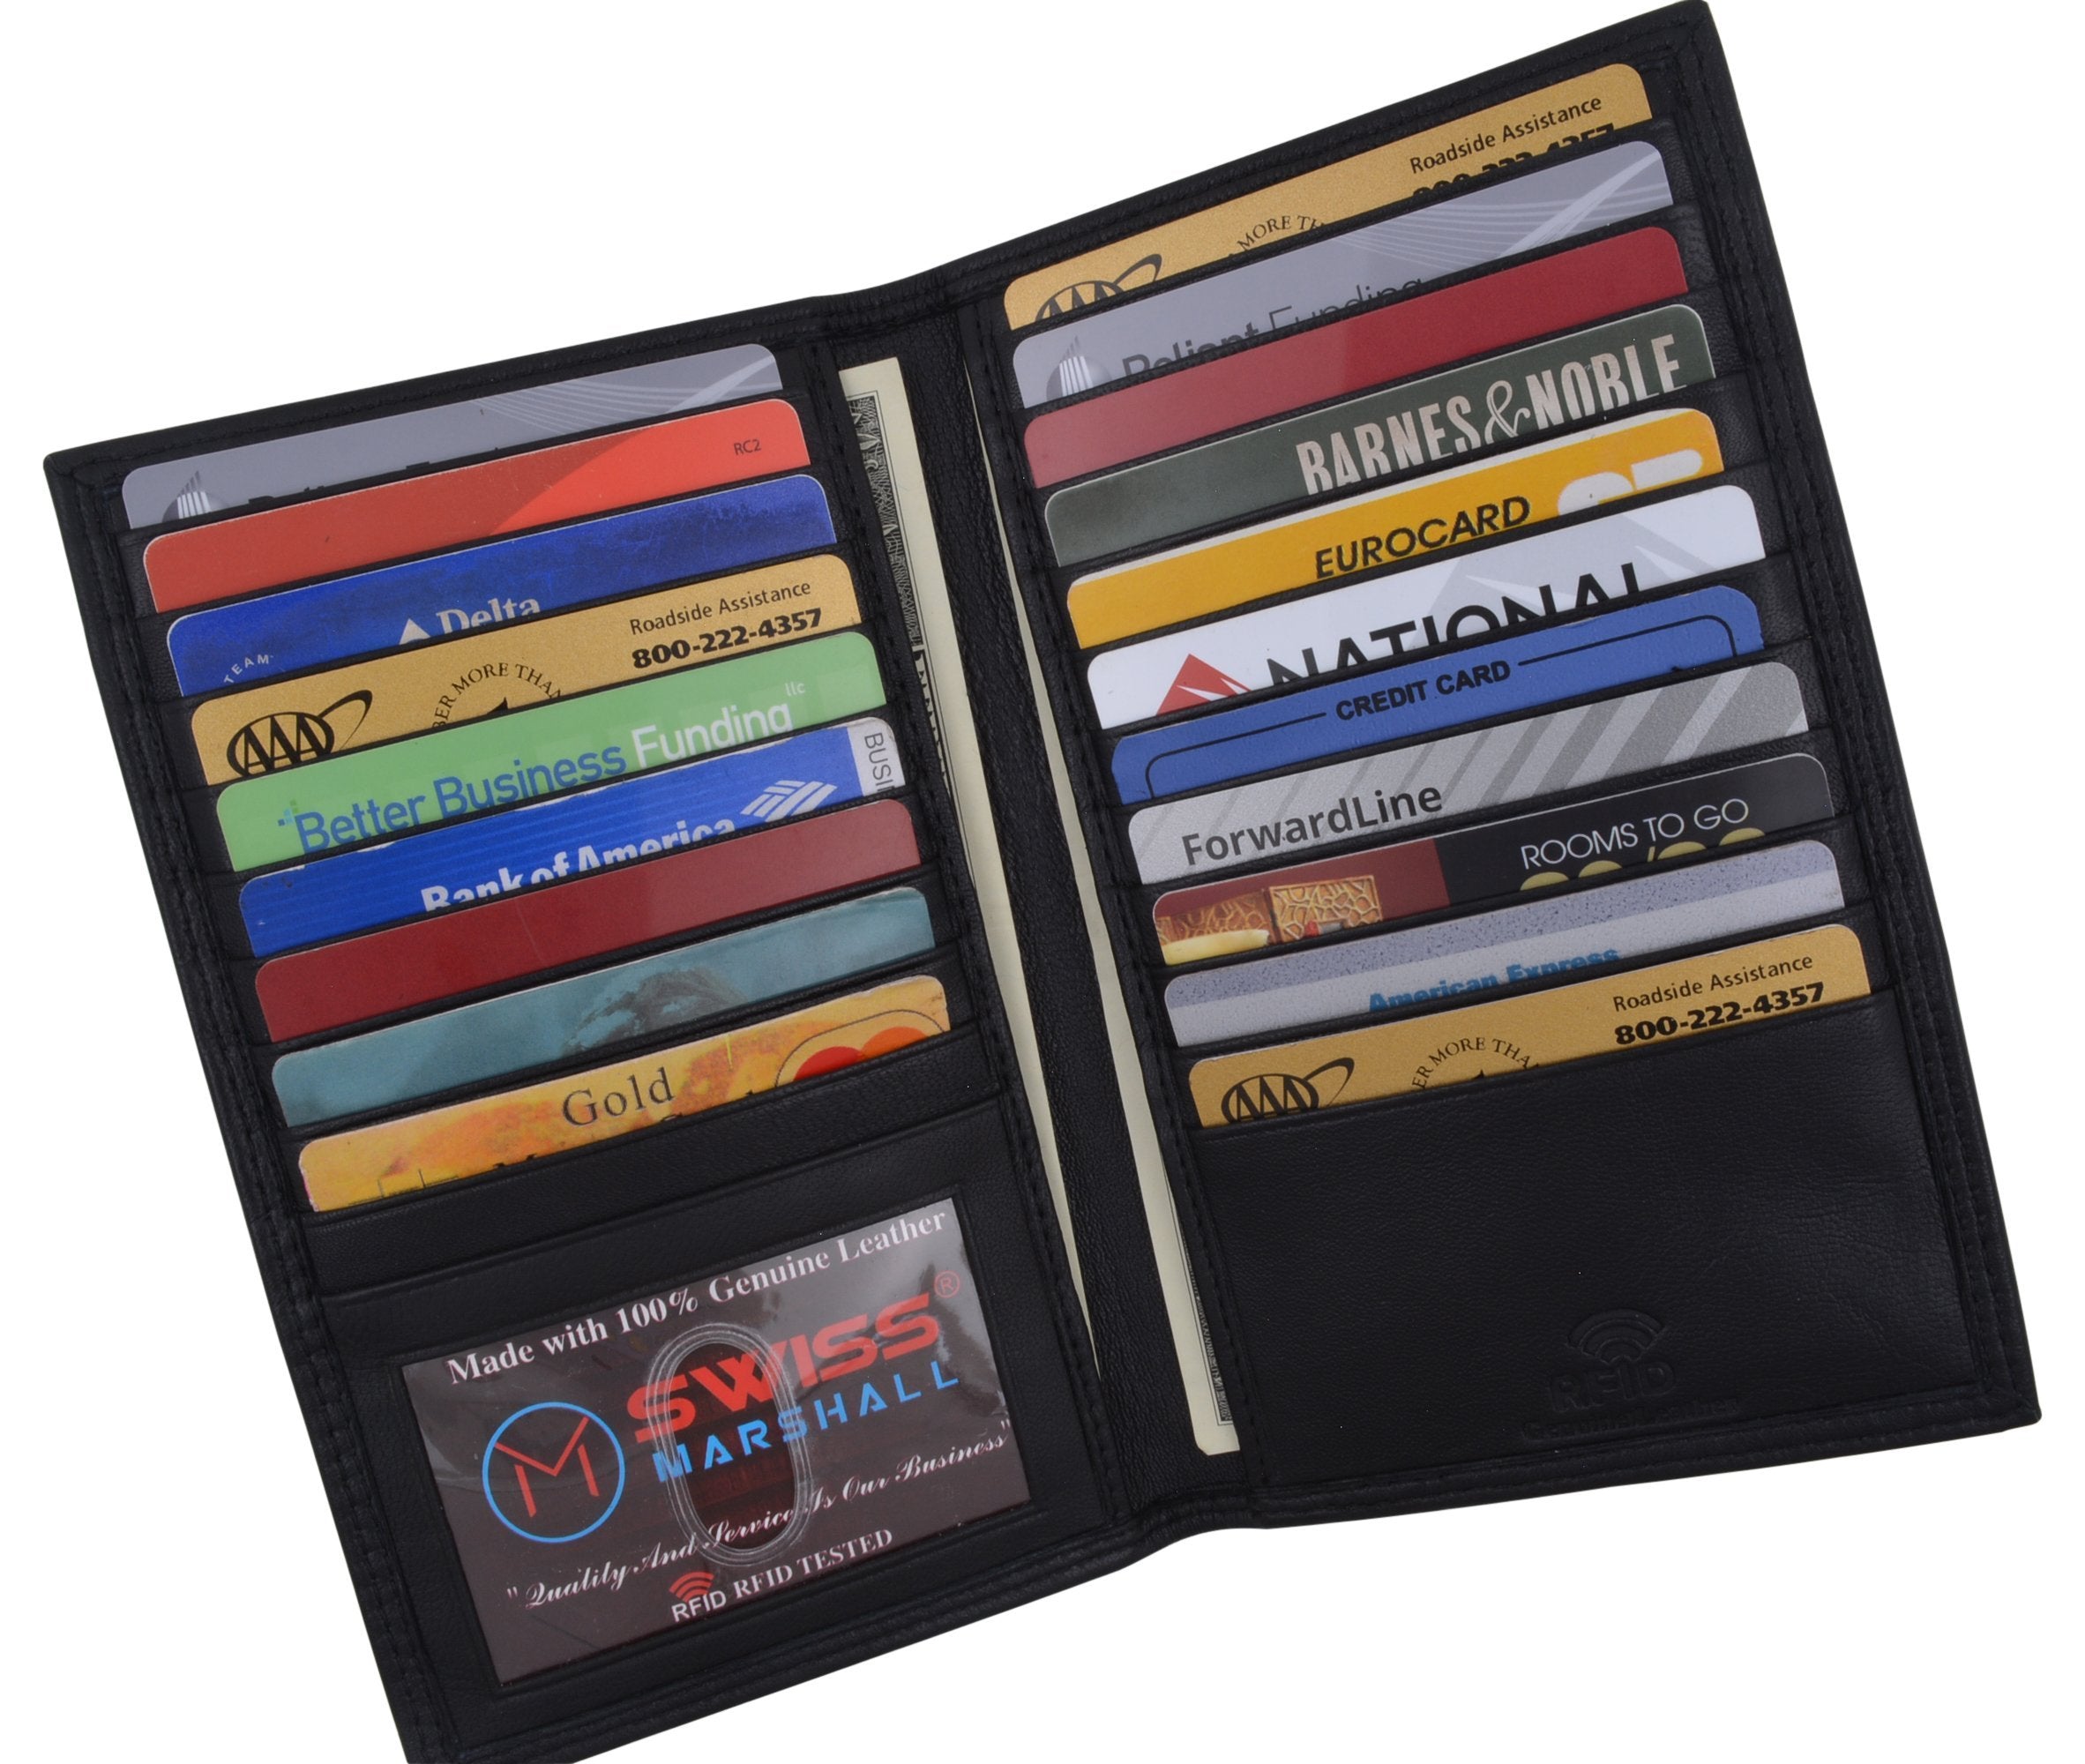 MENS REAL LEATHER SOFT QUALITY DESIGNER WALLET CREDIT CARD COIN